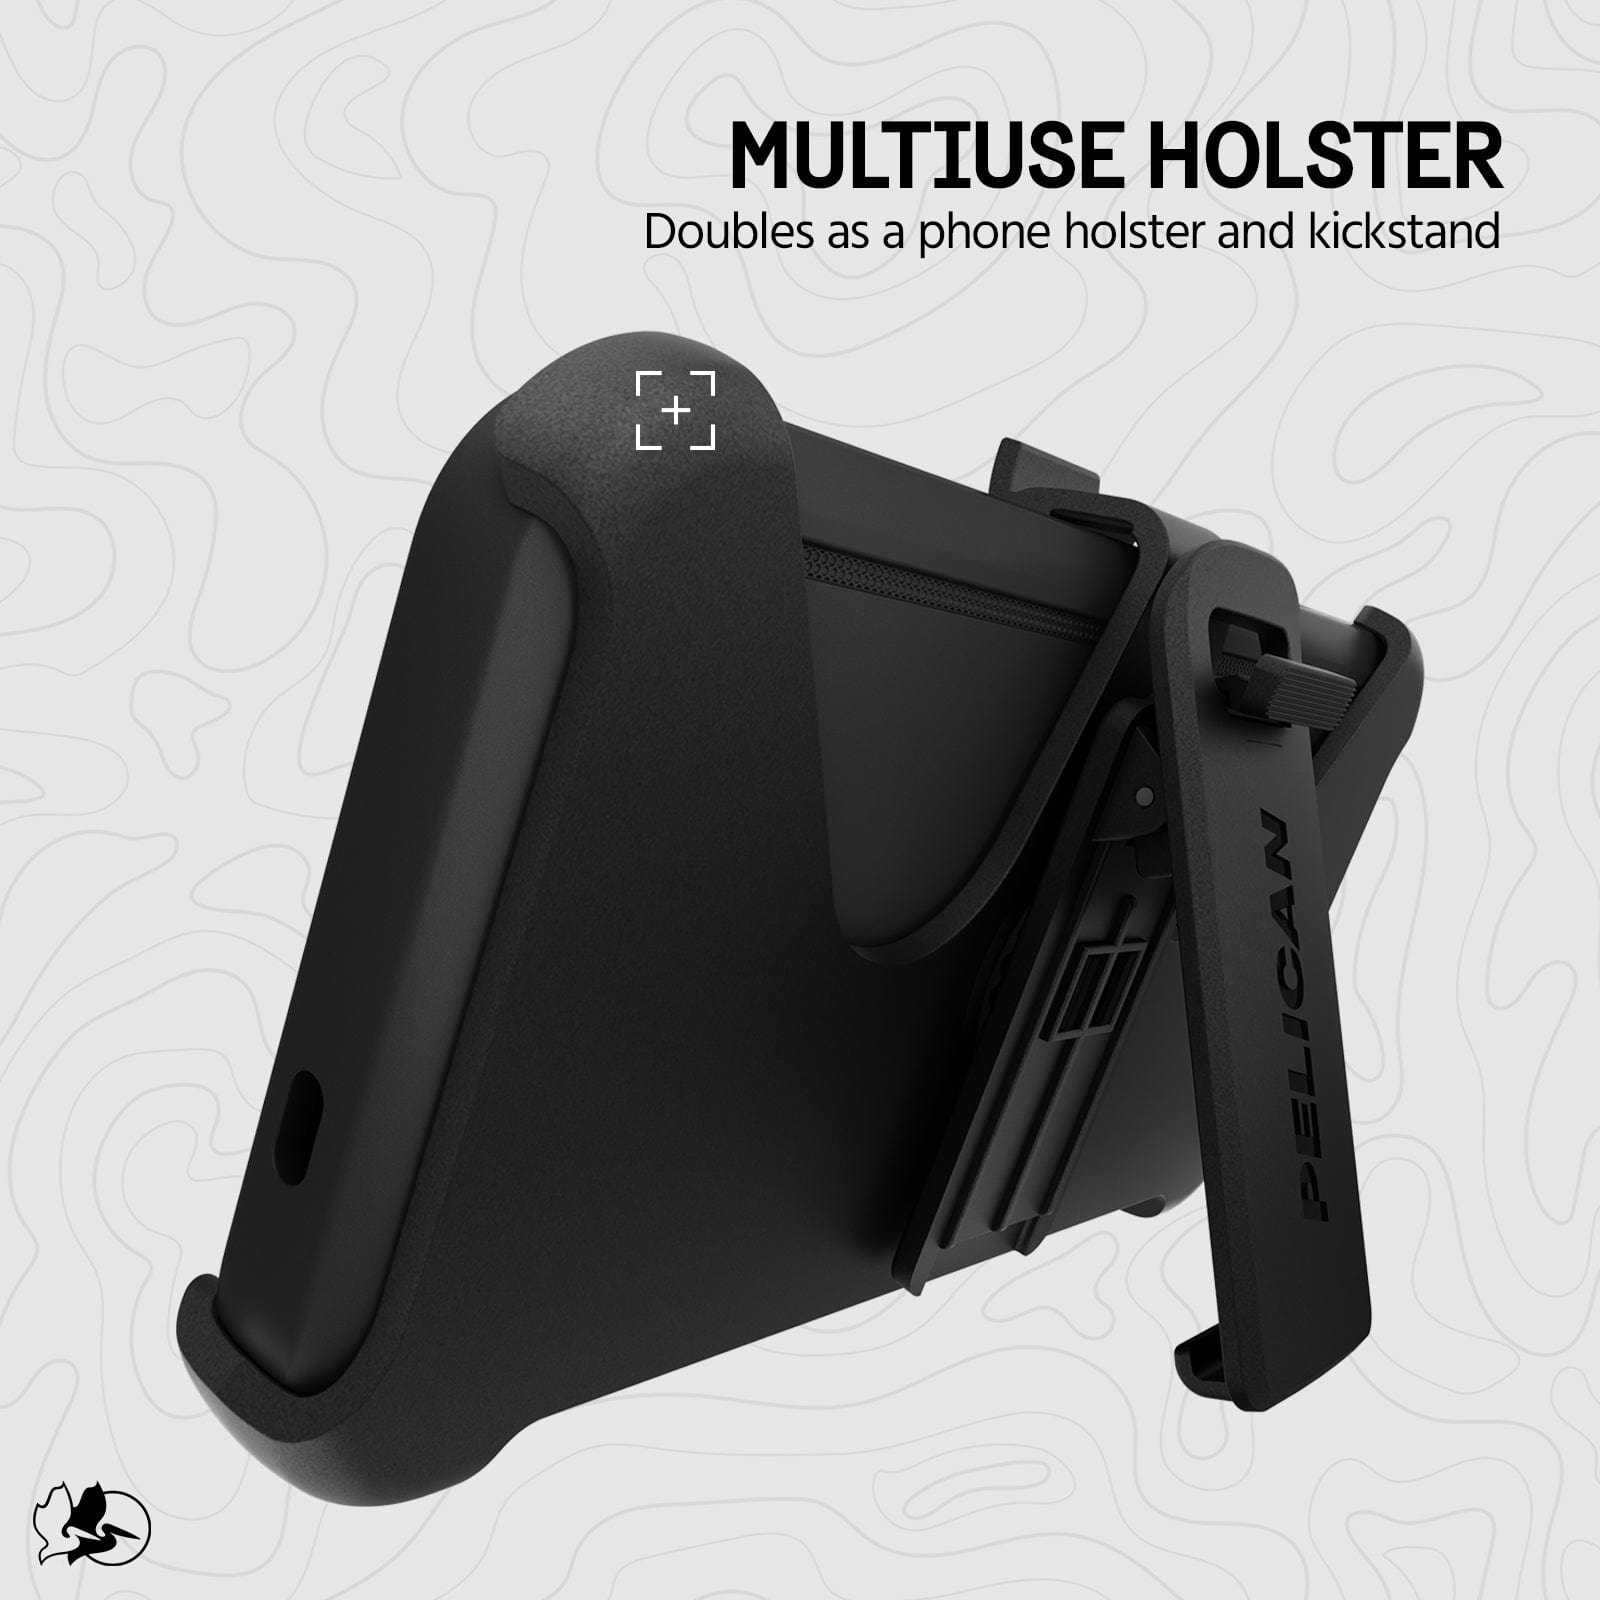 MULTIUSE HOLSTER DOUBLES AS PHONE HOLSTER KICKSTAND